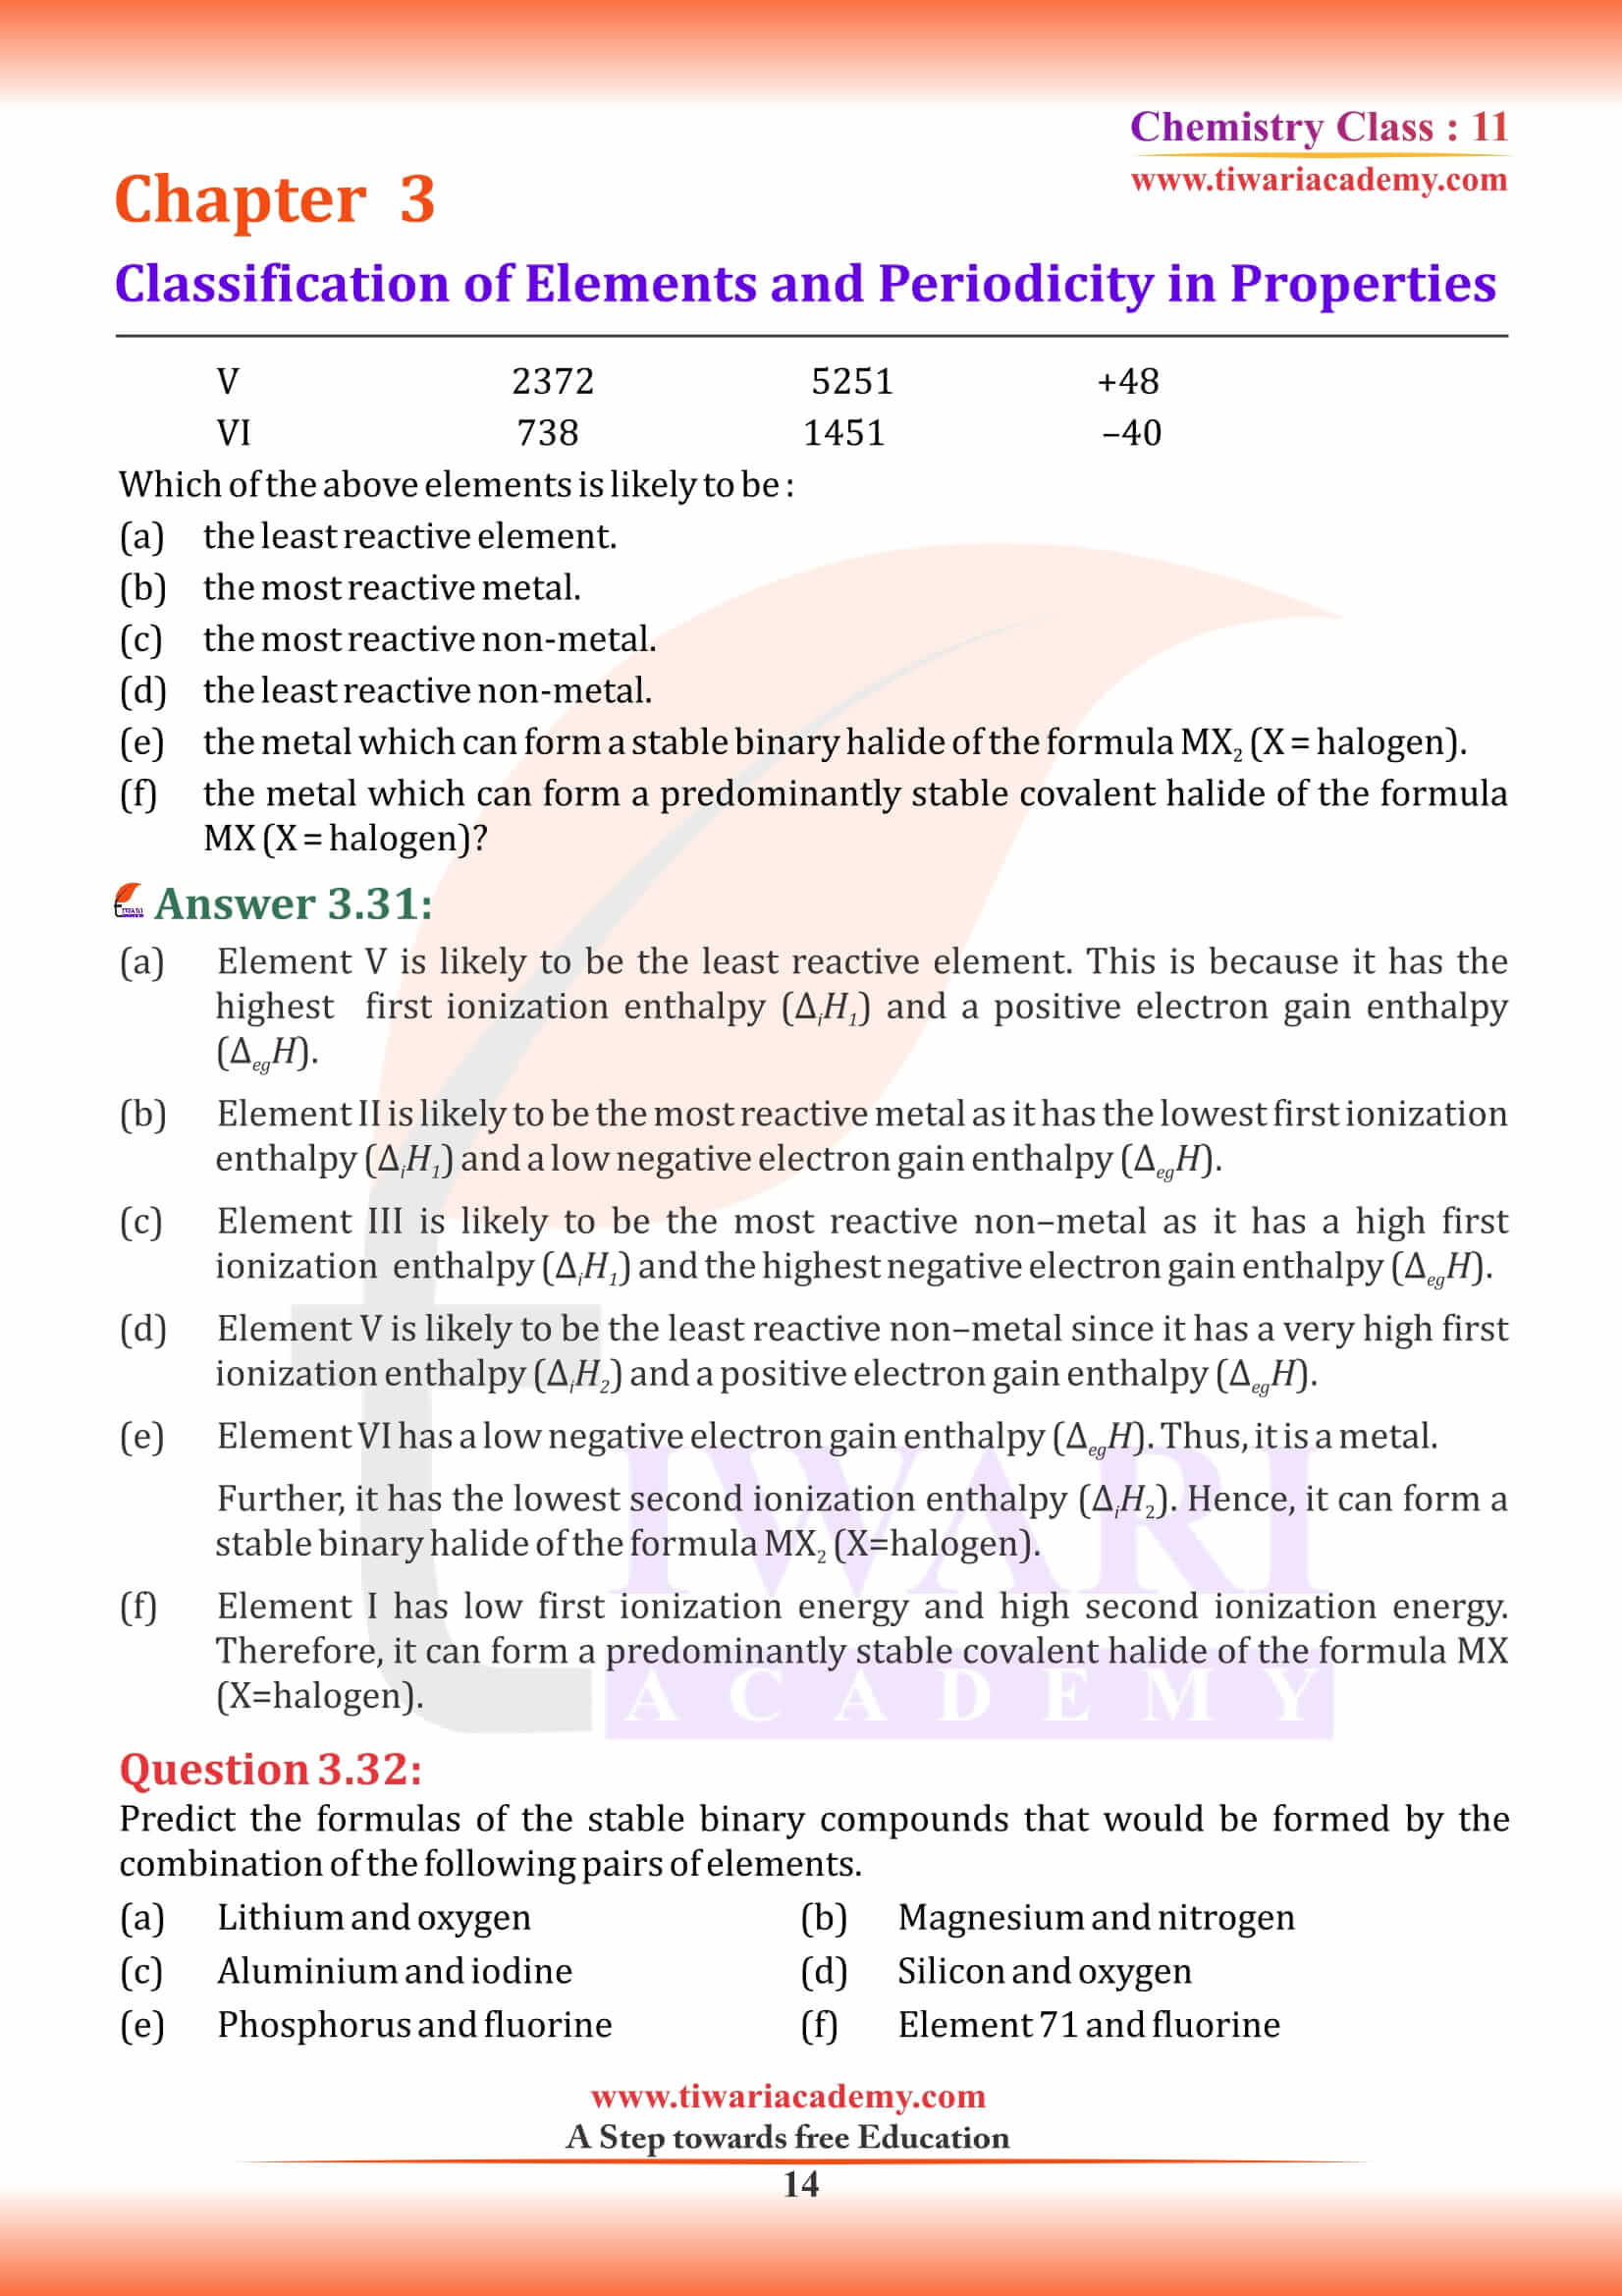 Class 11 Chemistry Chapter 3 MCQ